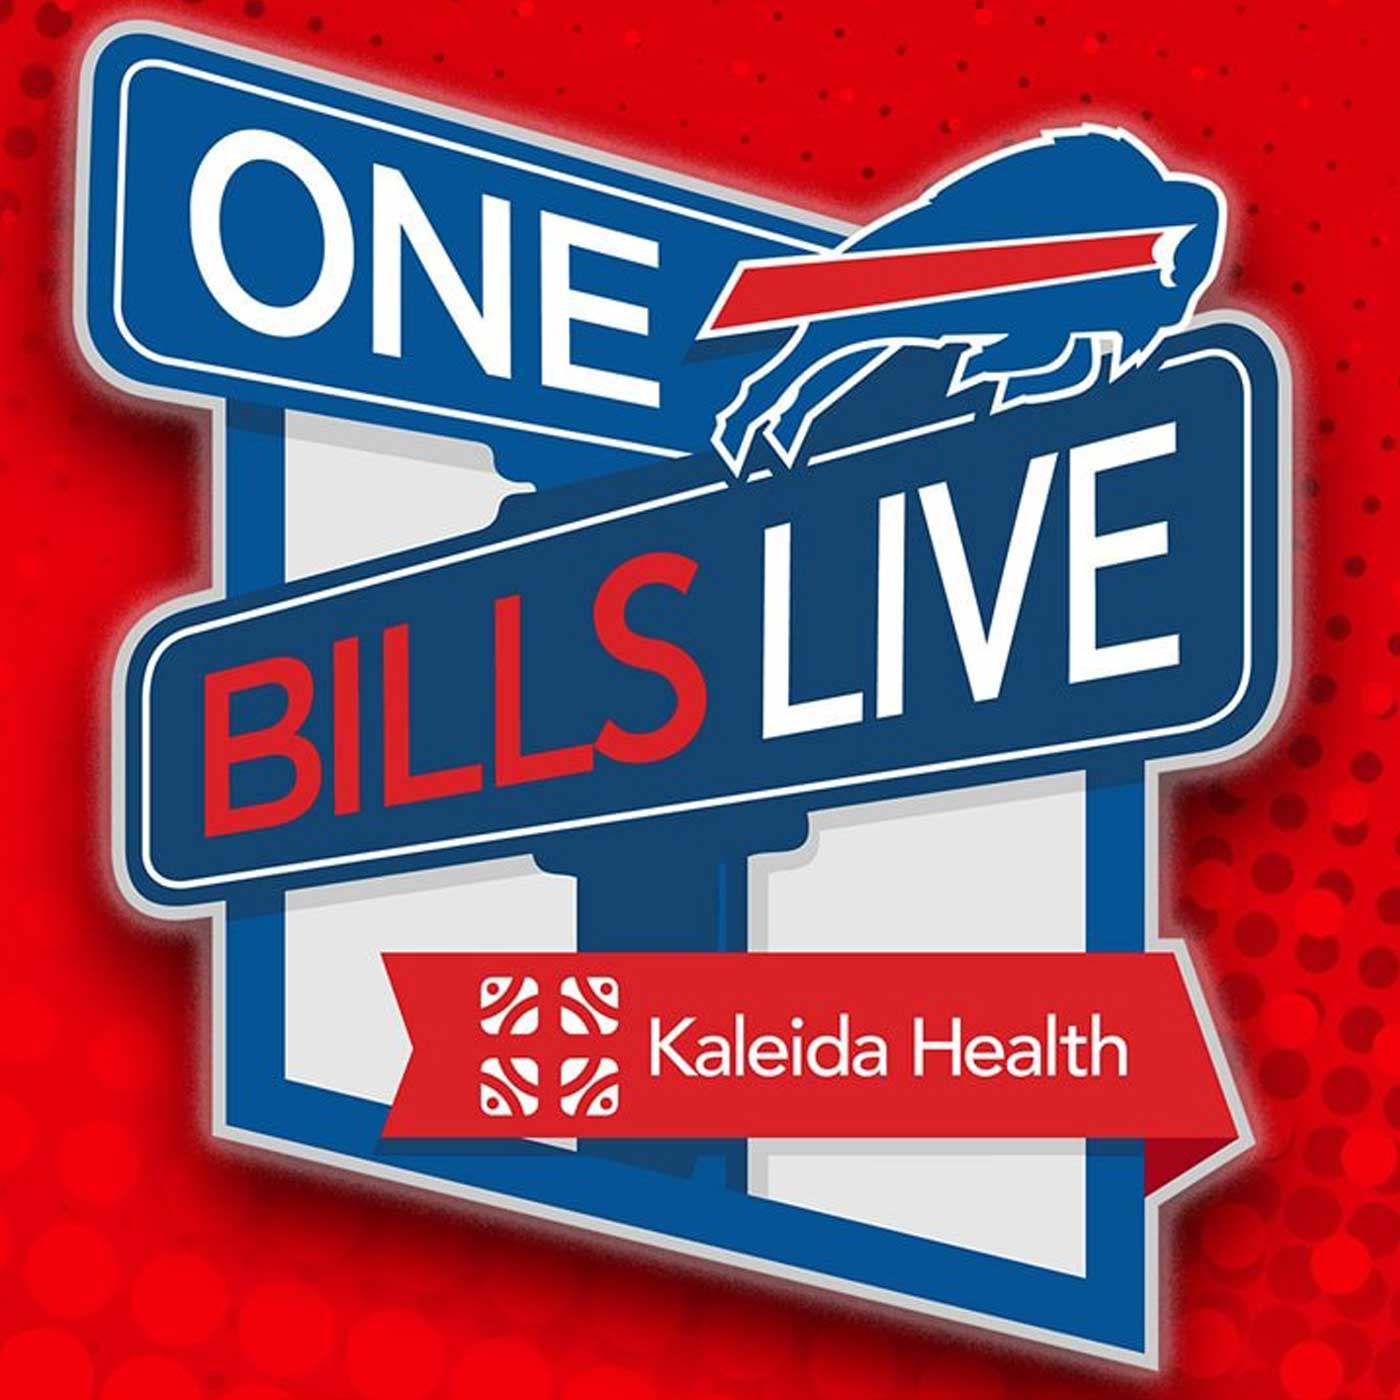 “I Couldn’t Be More Pleased With How the City of Buffalo Received Me” | Terrell Owens Joins One Bills Live